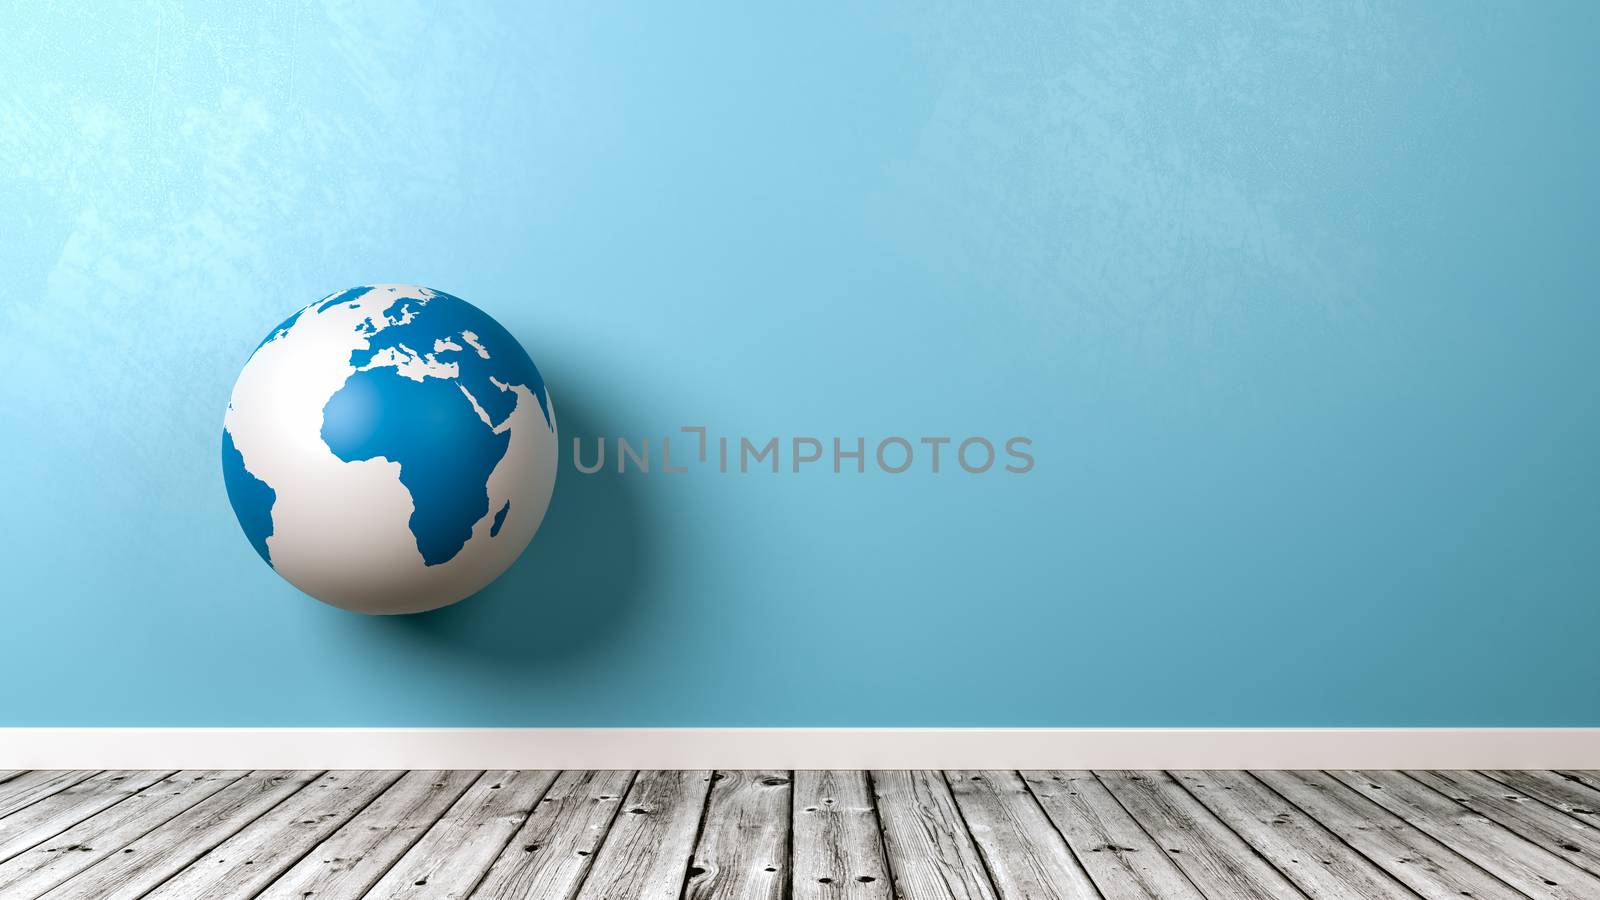 Blue and White Earth Globe Against Blue Wall with Copyspace in a Wooden Floor Room 3D Illustration